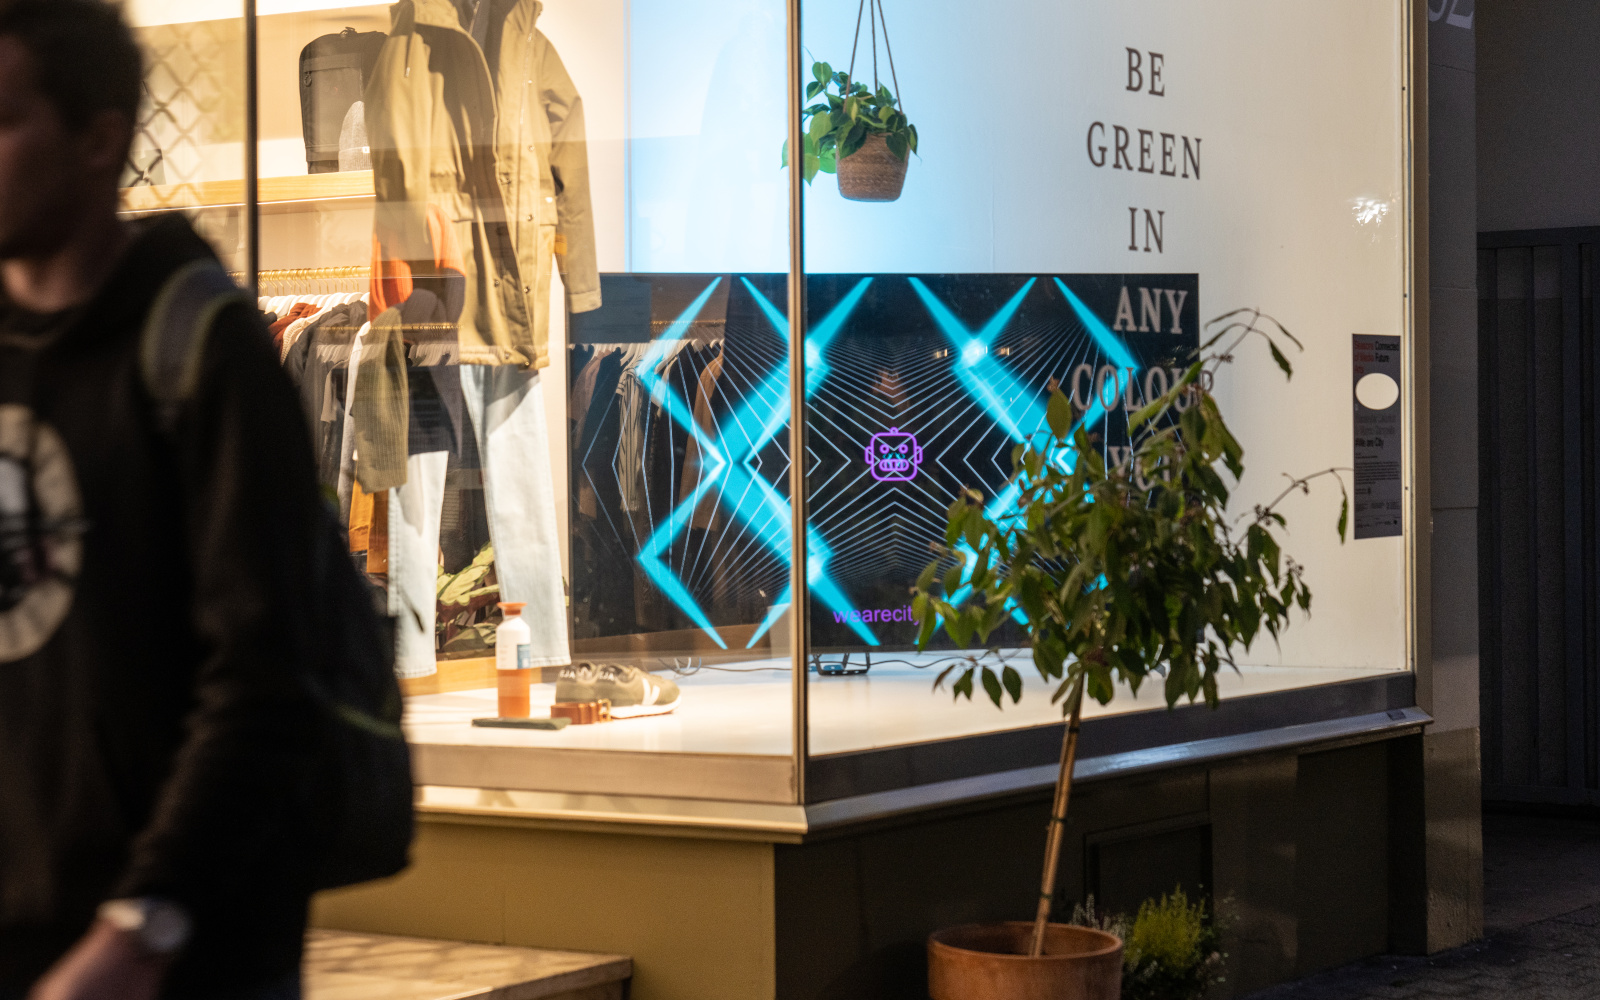 The interactive light installation is shown on a large screen located in the window of a clothing shop.